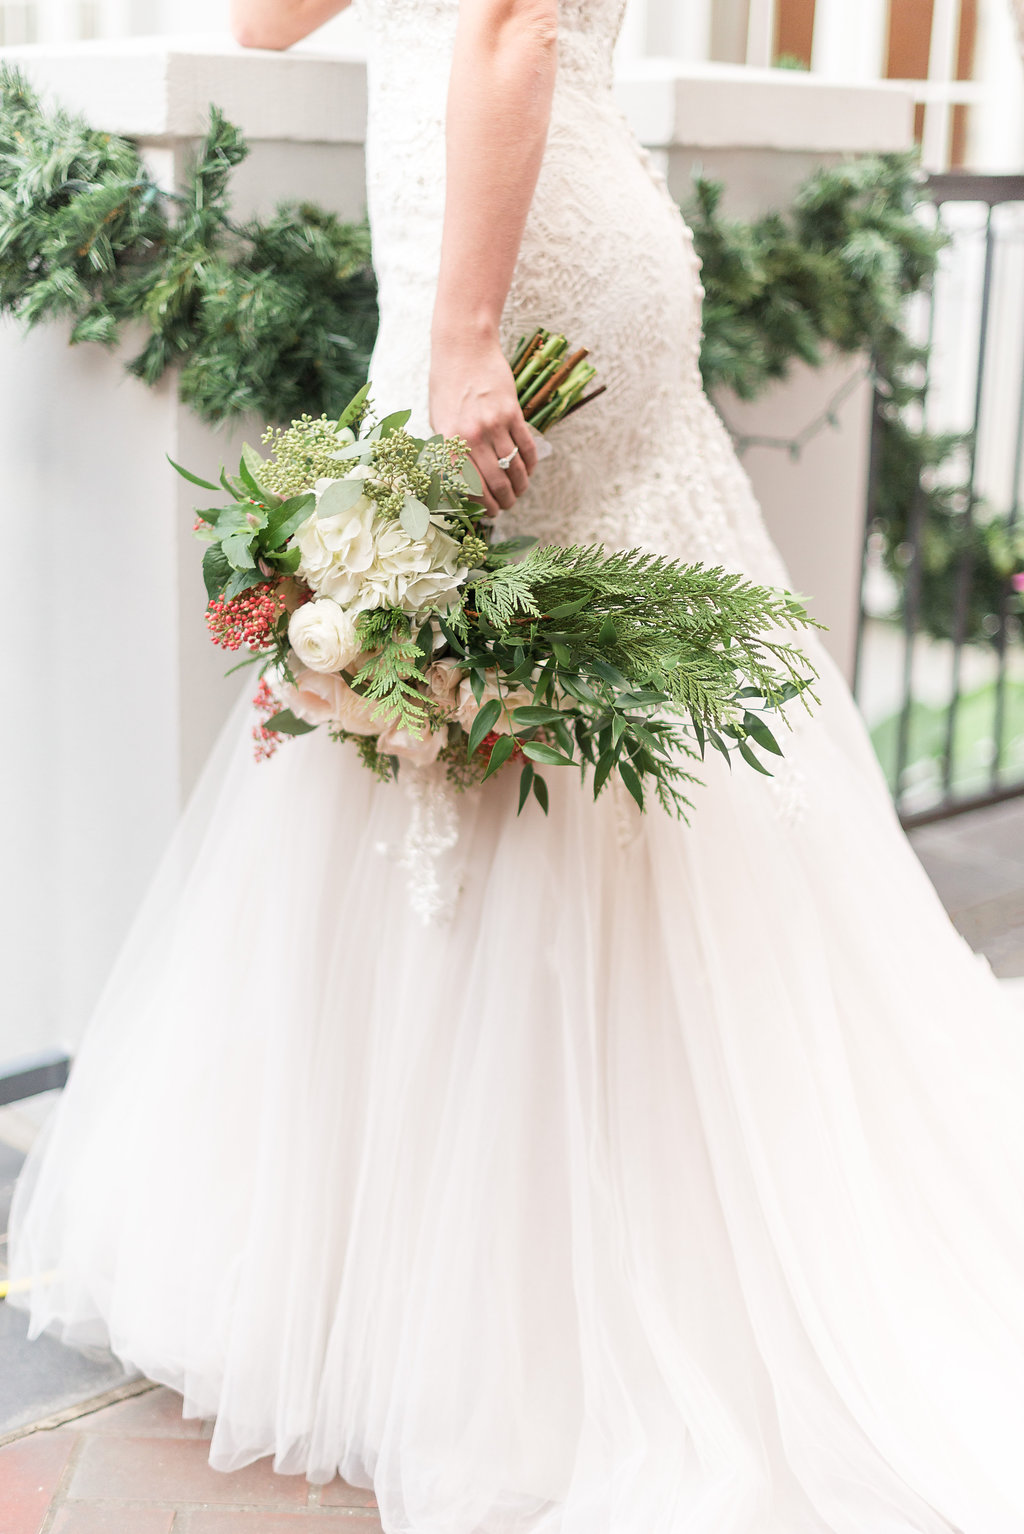 New Orleans Wedding - Red and White Wedding — The Overwhelmed Bride Wedding Blog